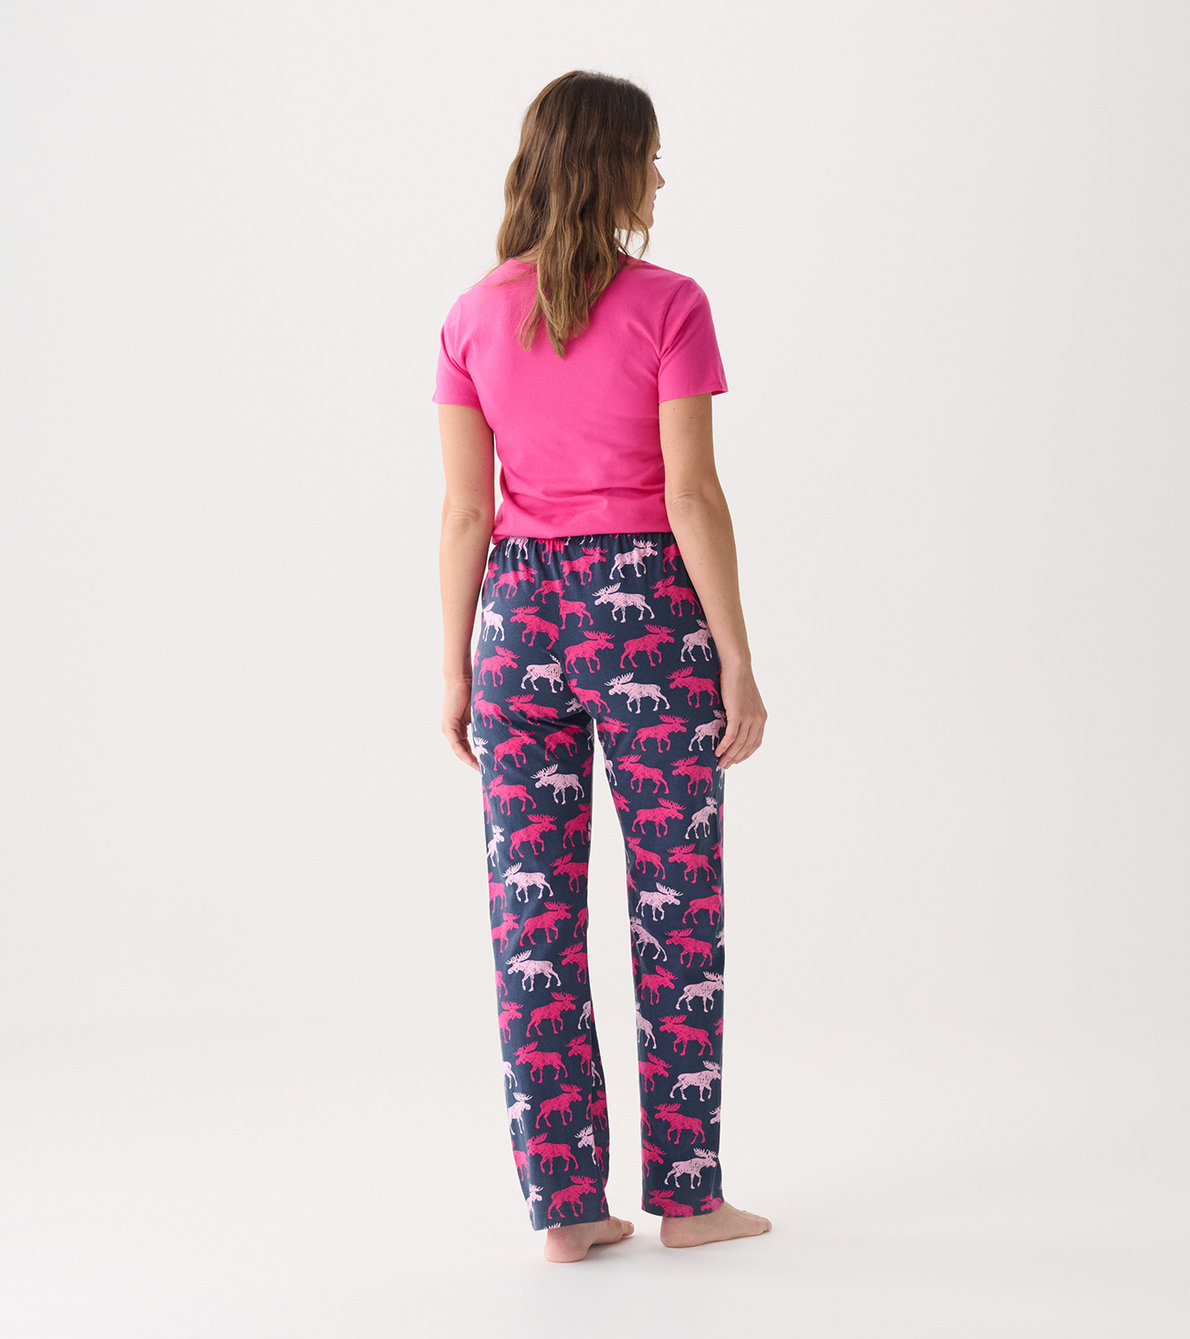 View larger image of Women's Raspberry Moose T-Shirt and Pants Pajama Separates